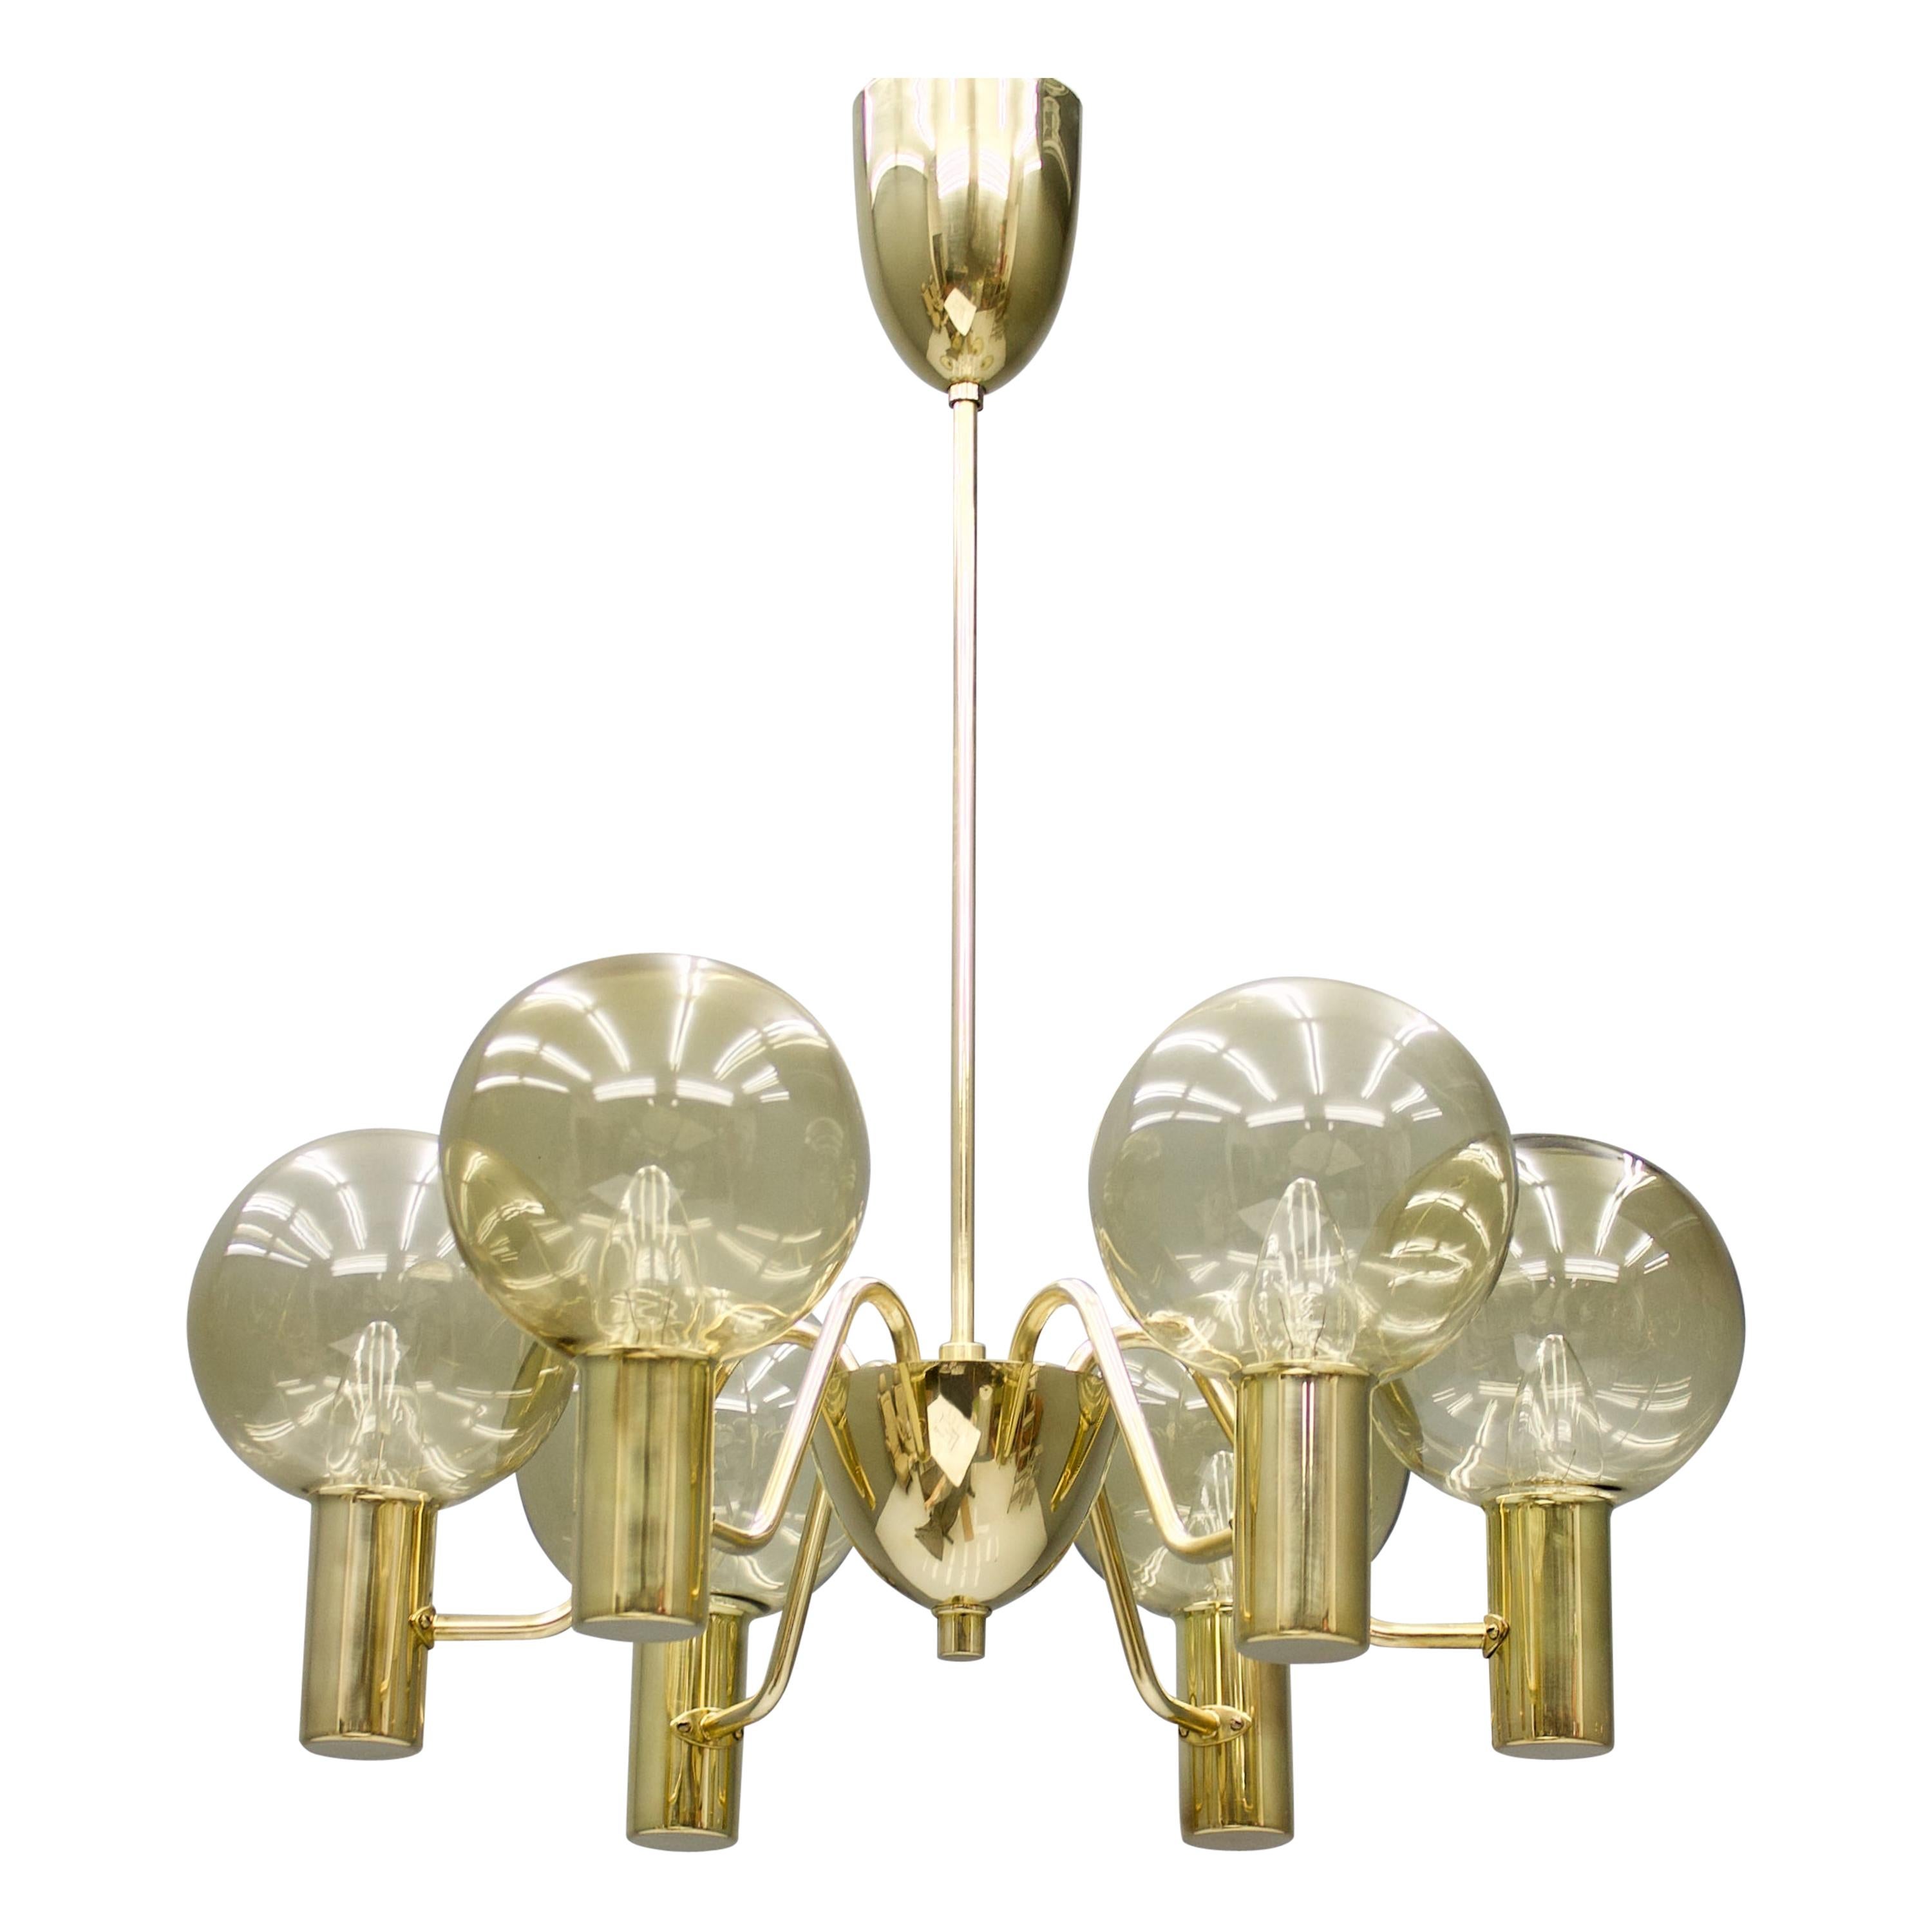 Hans-Agne Jakobsson Chandelier Patricia T 372/6 Brass and Glass, Sweden, 1960s